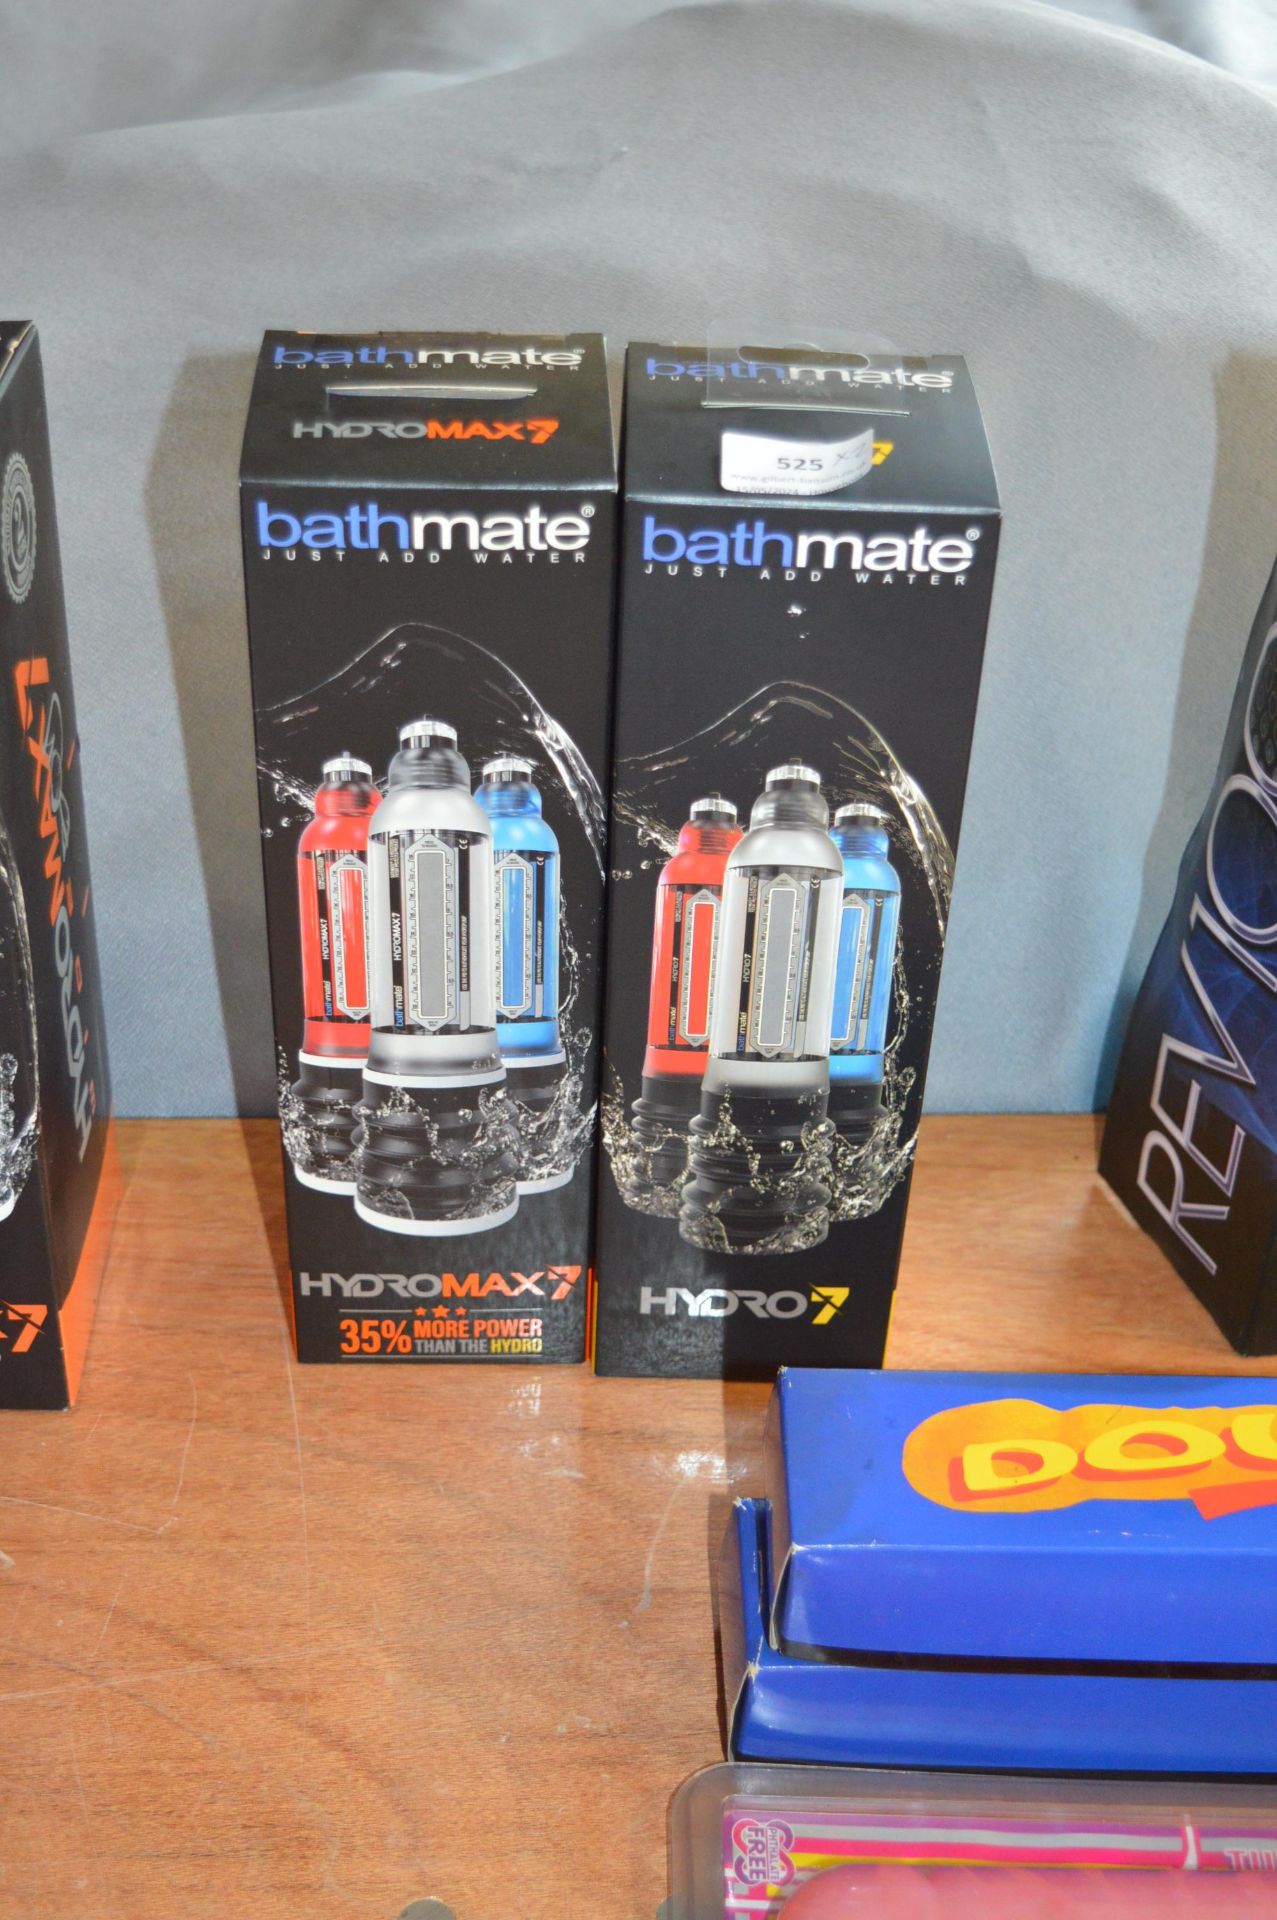 Two Bath Mate Hydro Massagers (0ver 18's only)